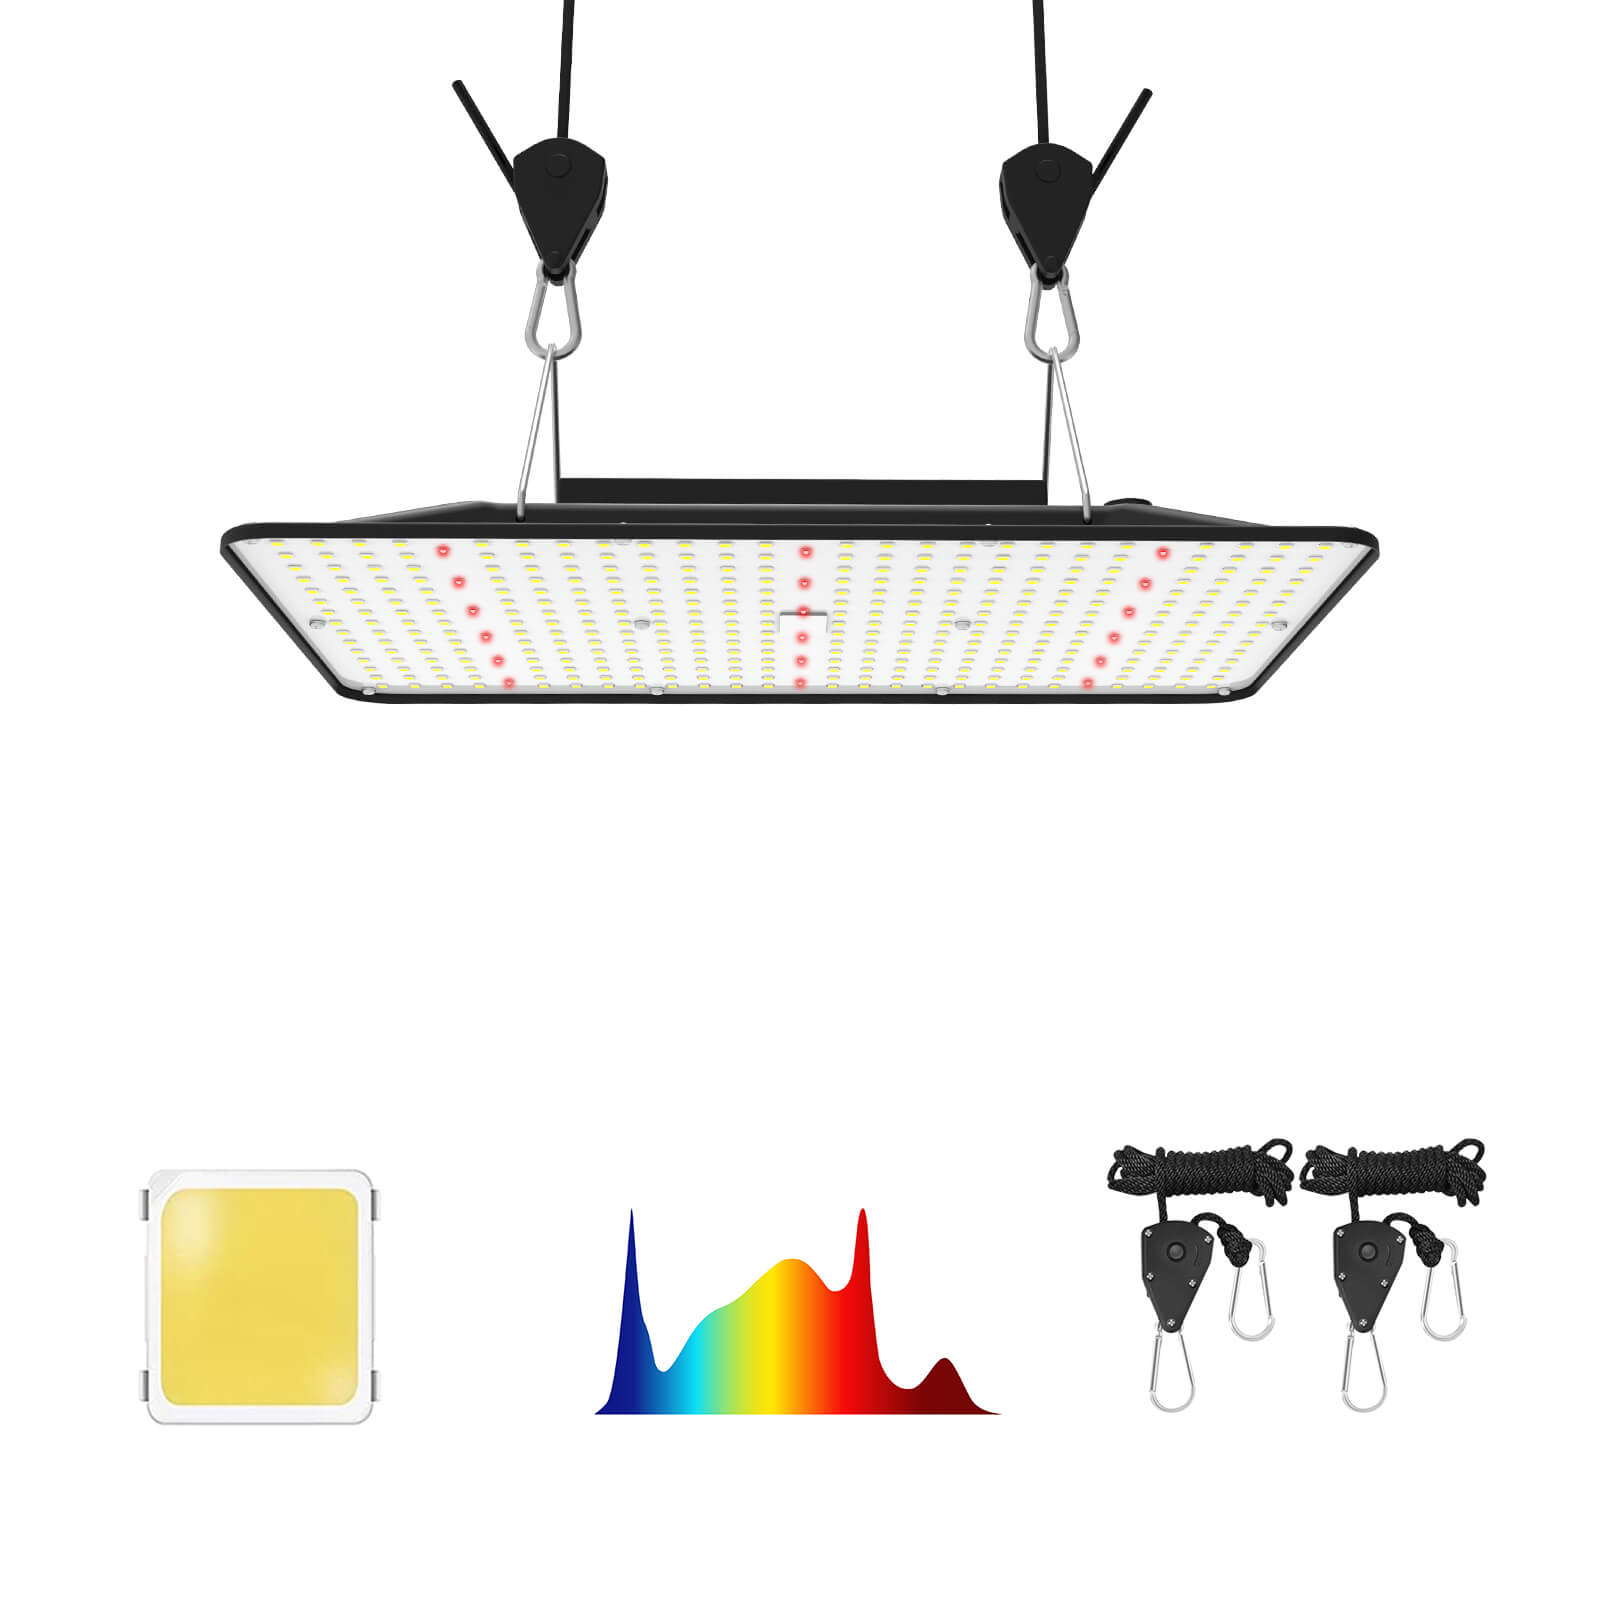 CT-100 Full Spectrum LED Grow Light - 100 Watts, 2x2 (4 sq ft), Small Fixture, Dimmable Knob, IR Diodes | Cultiuana - 0